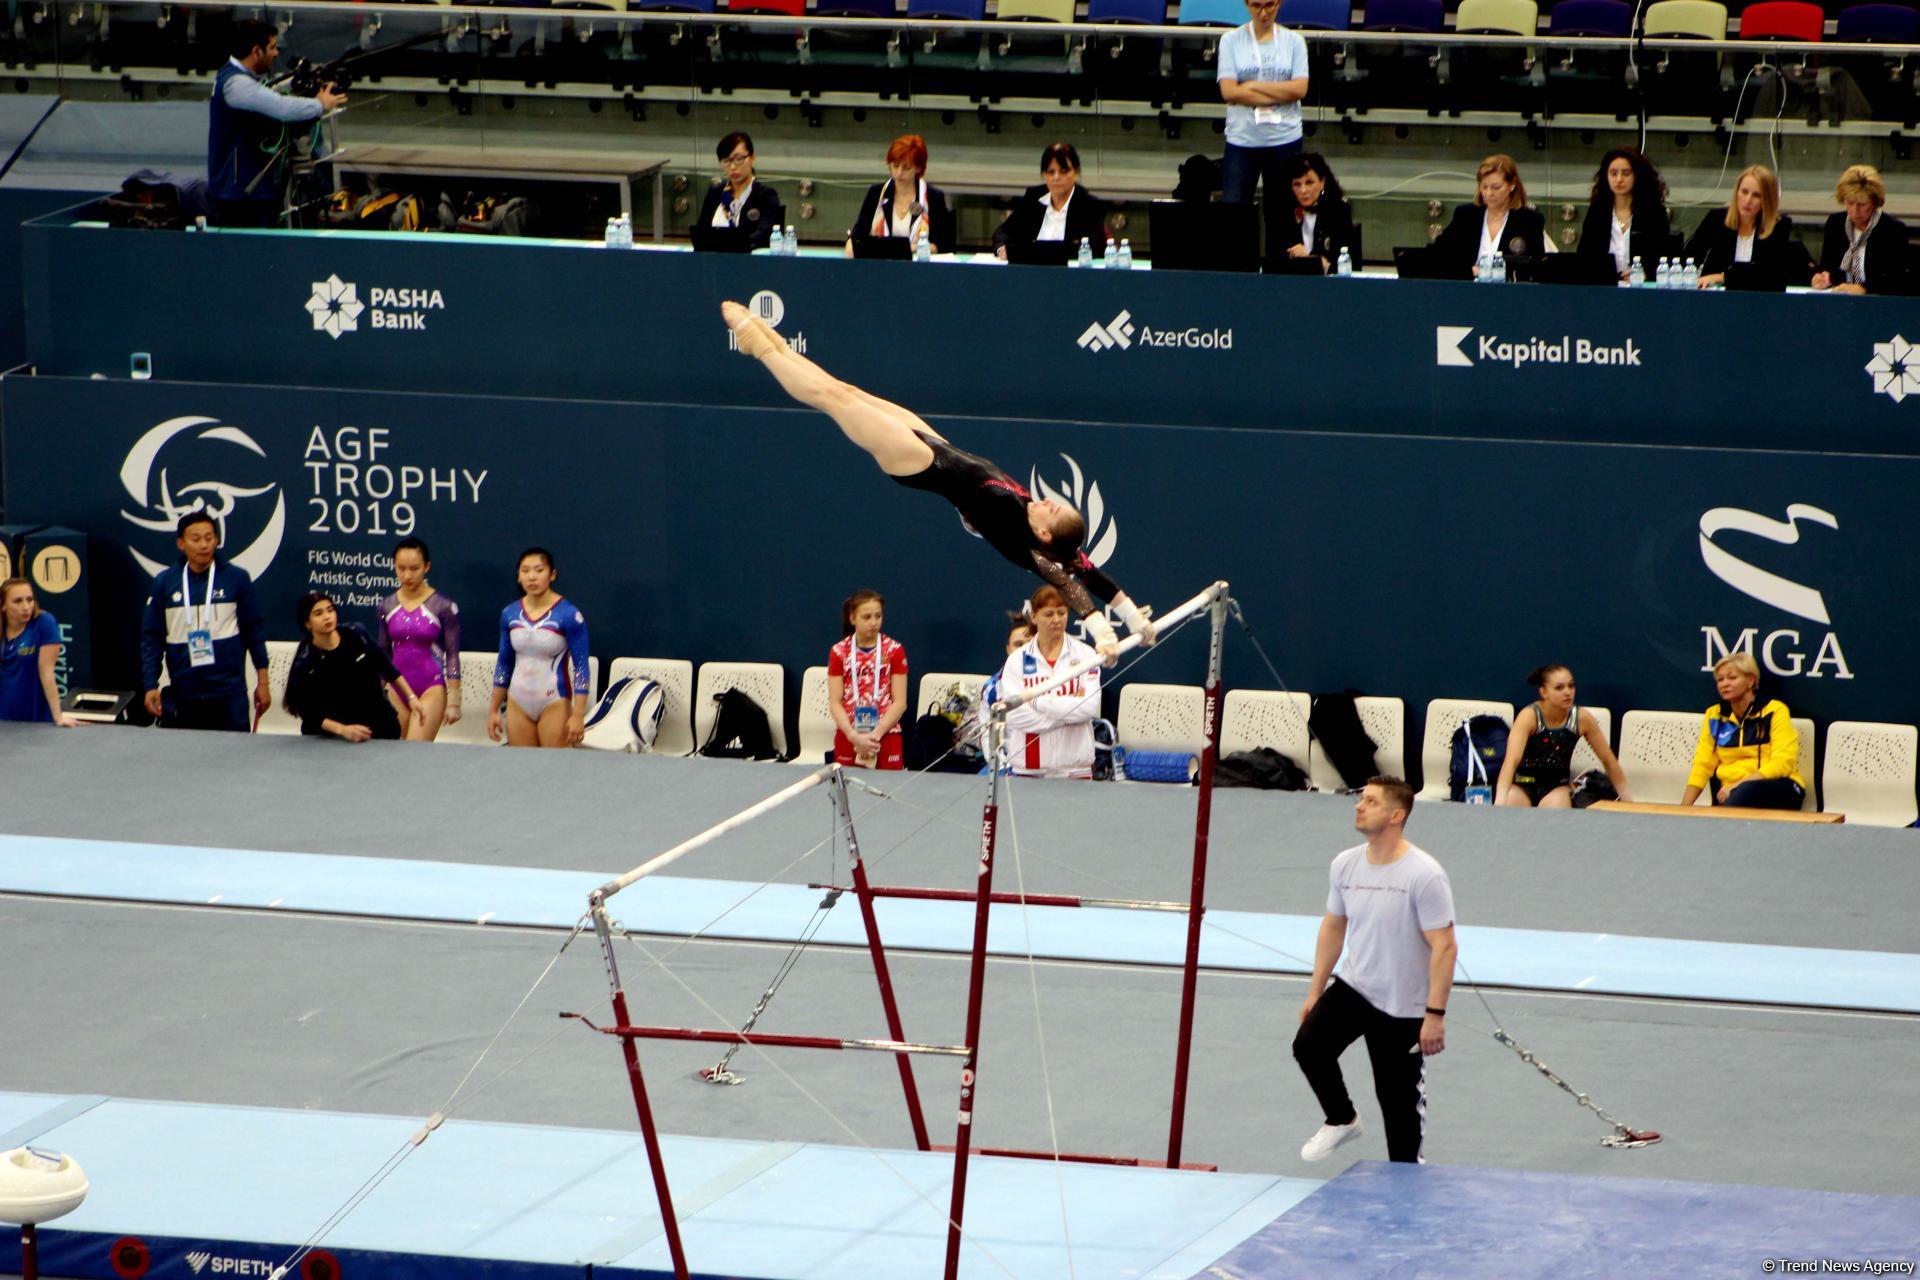 First day of FIG Artistic Gymnastics Individual Apparatus World Cup